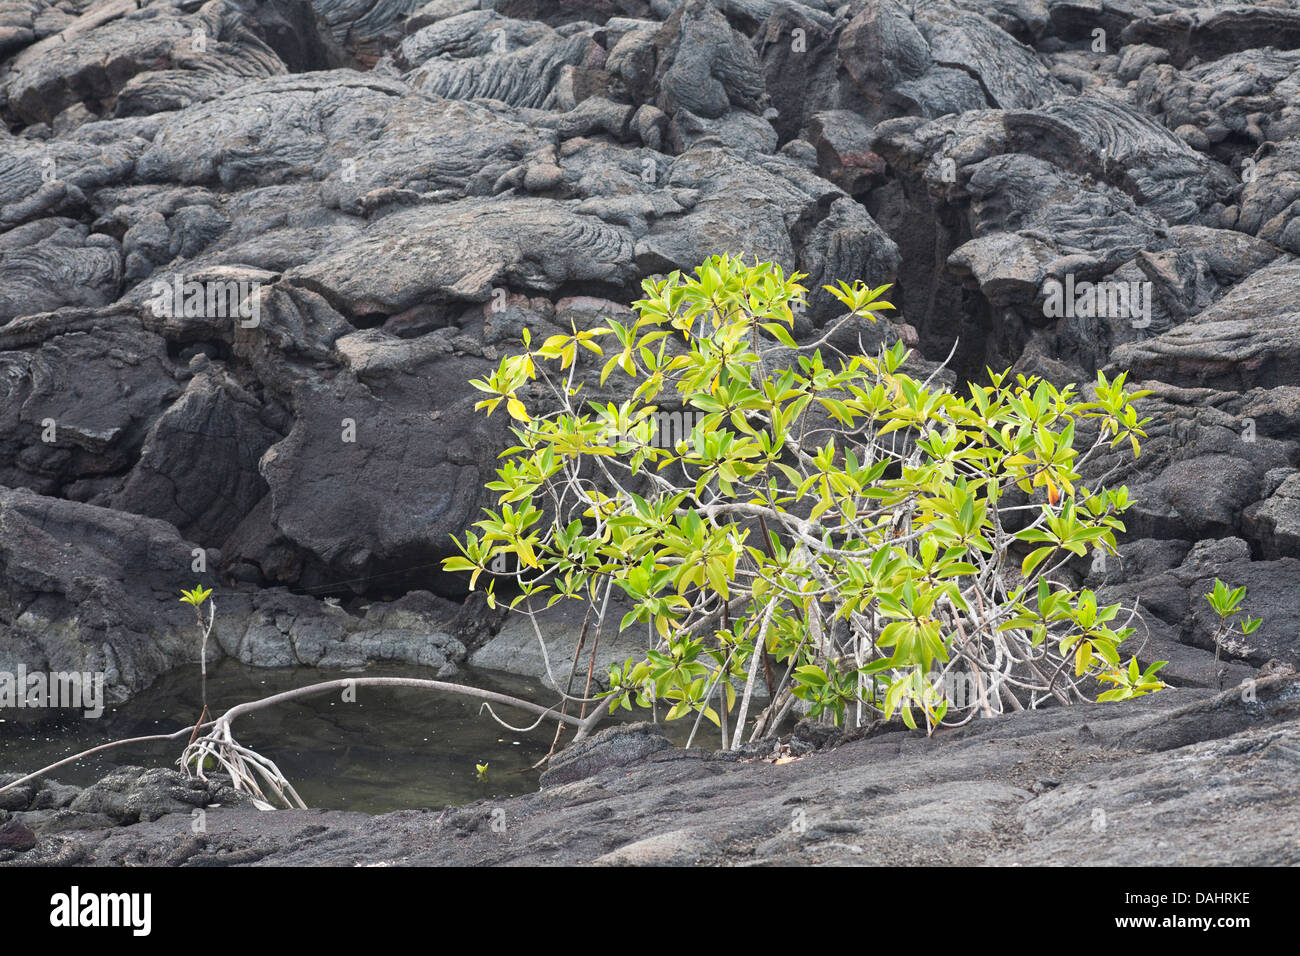 Primary succession with Red Mangrove (Rhizophora mangle) colonizing small saline pool on pahoehoe lava in the Galapagos Islands, Ecuador Stock Photo